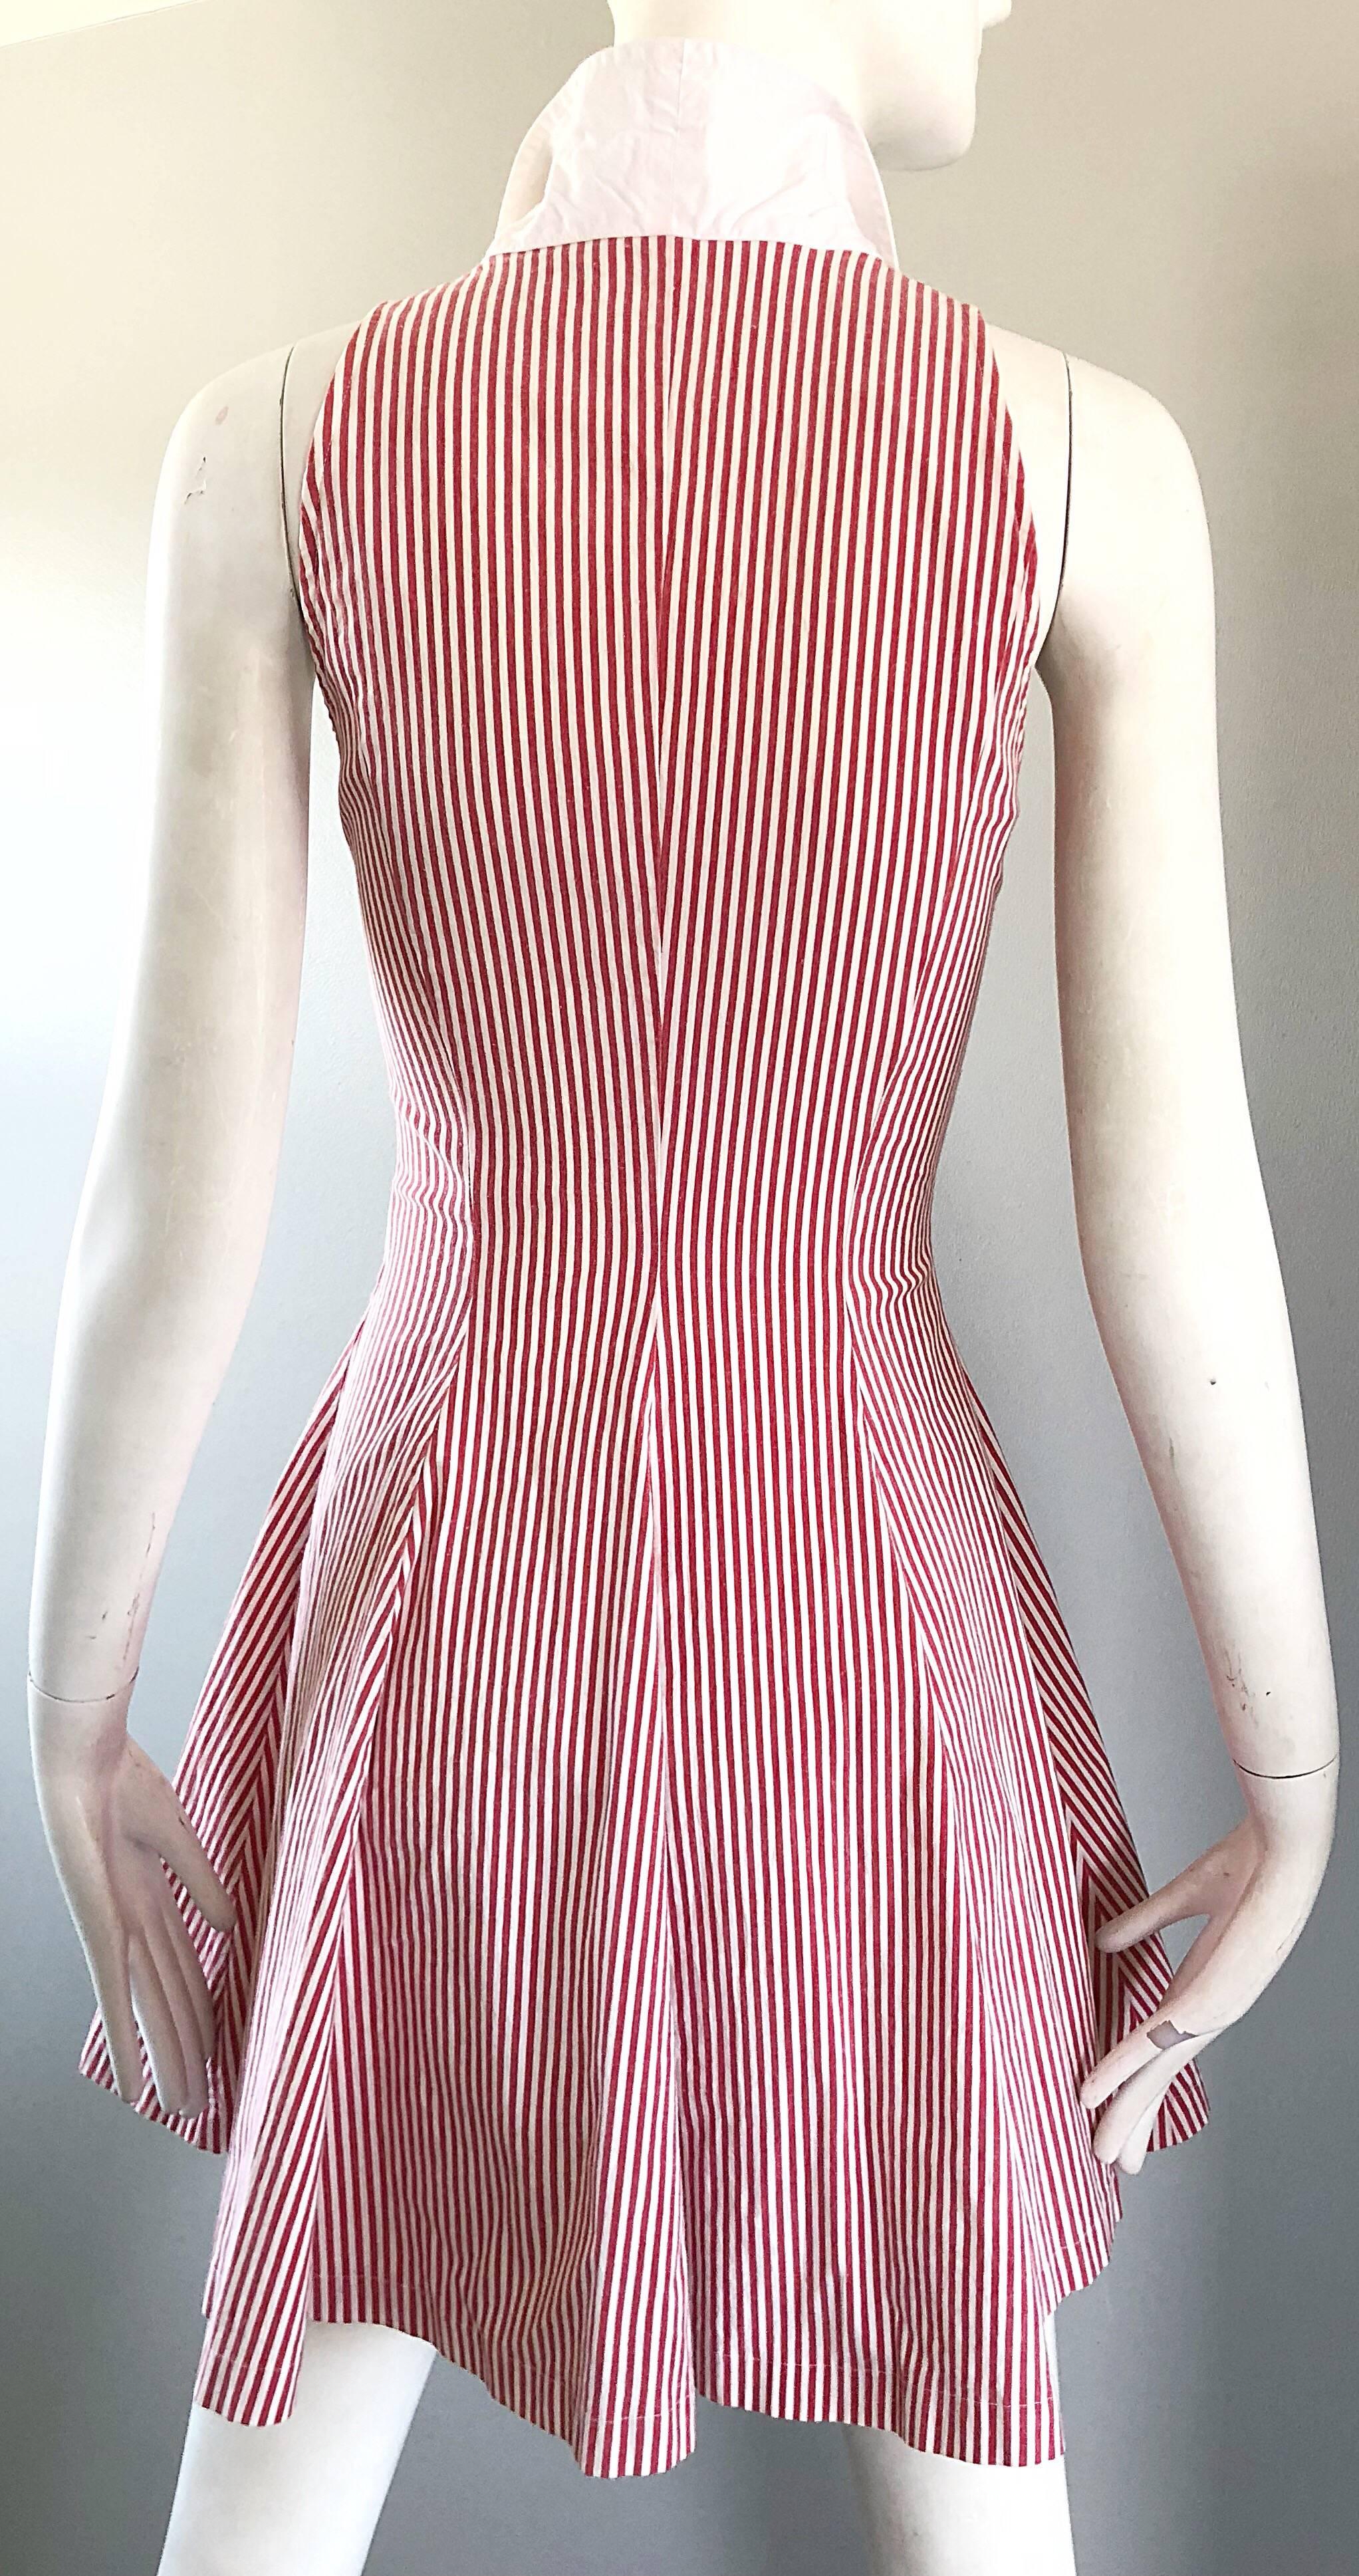 1980s Angelo Tarlazzi Vintage Red and White Seersucker Nautical Striped Dress  For Sale 4